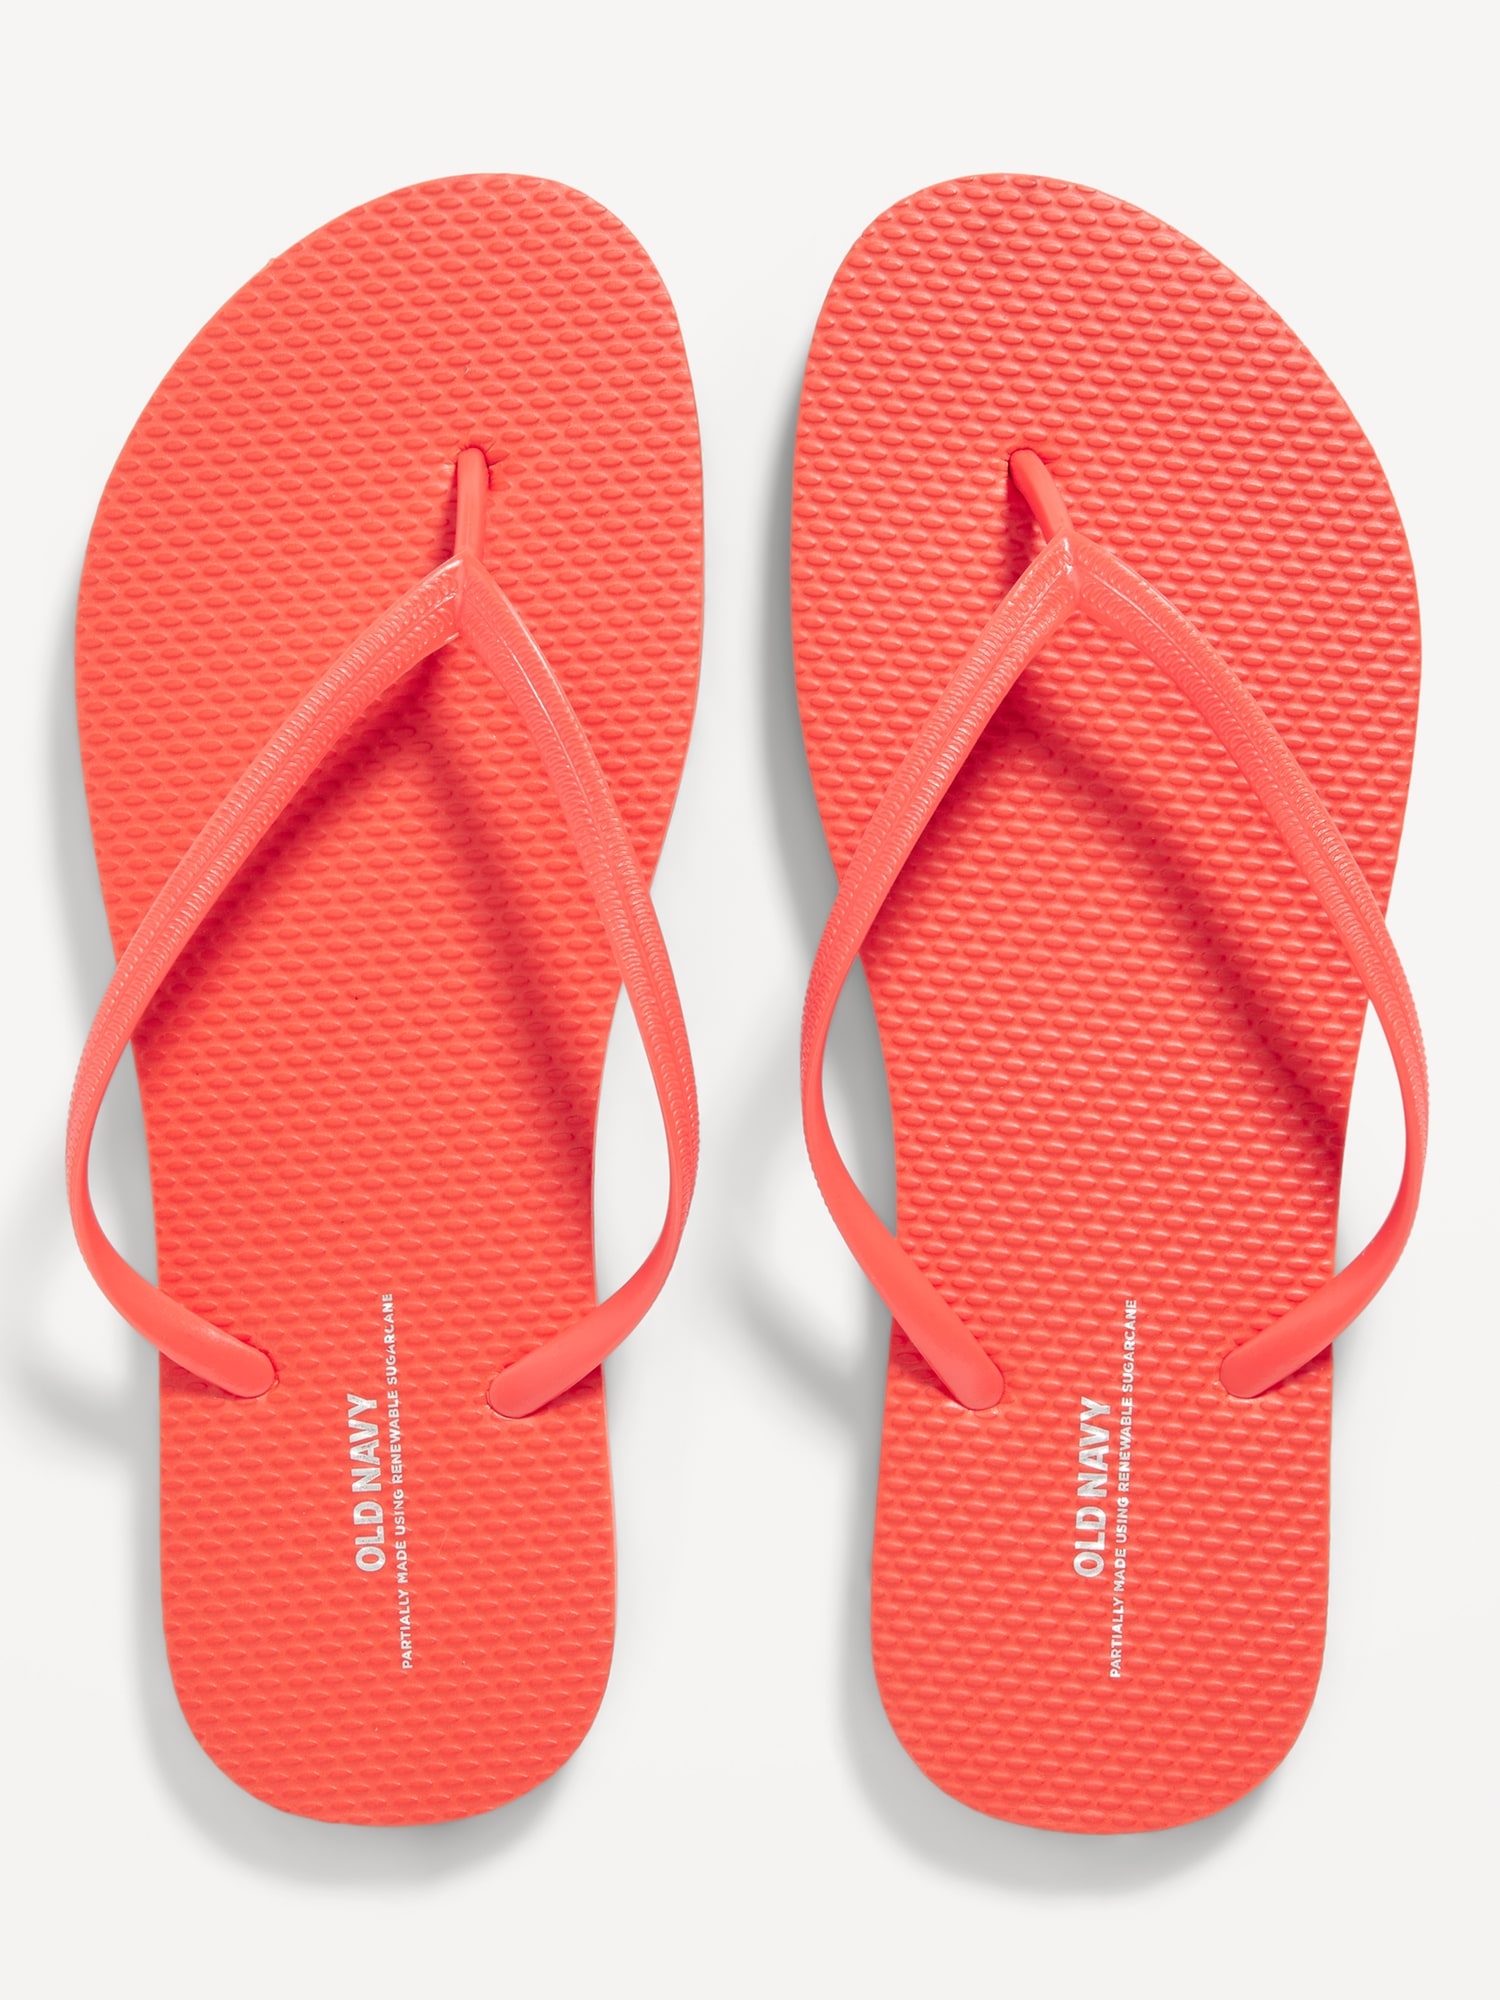 NEW Old Navy FLIP FLOPS Ladies Thong Sandals SIZE 11 RED Shoes